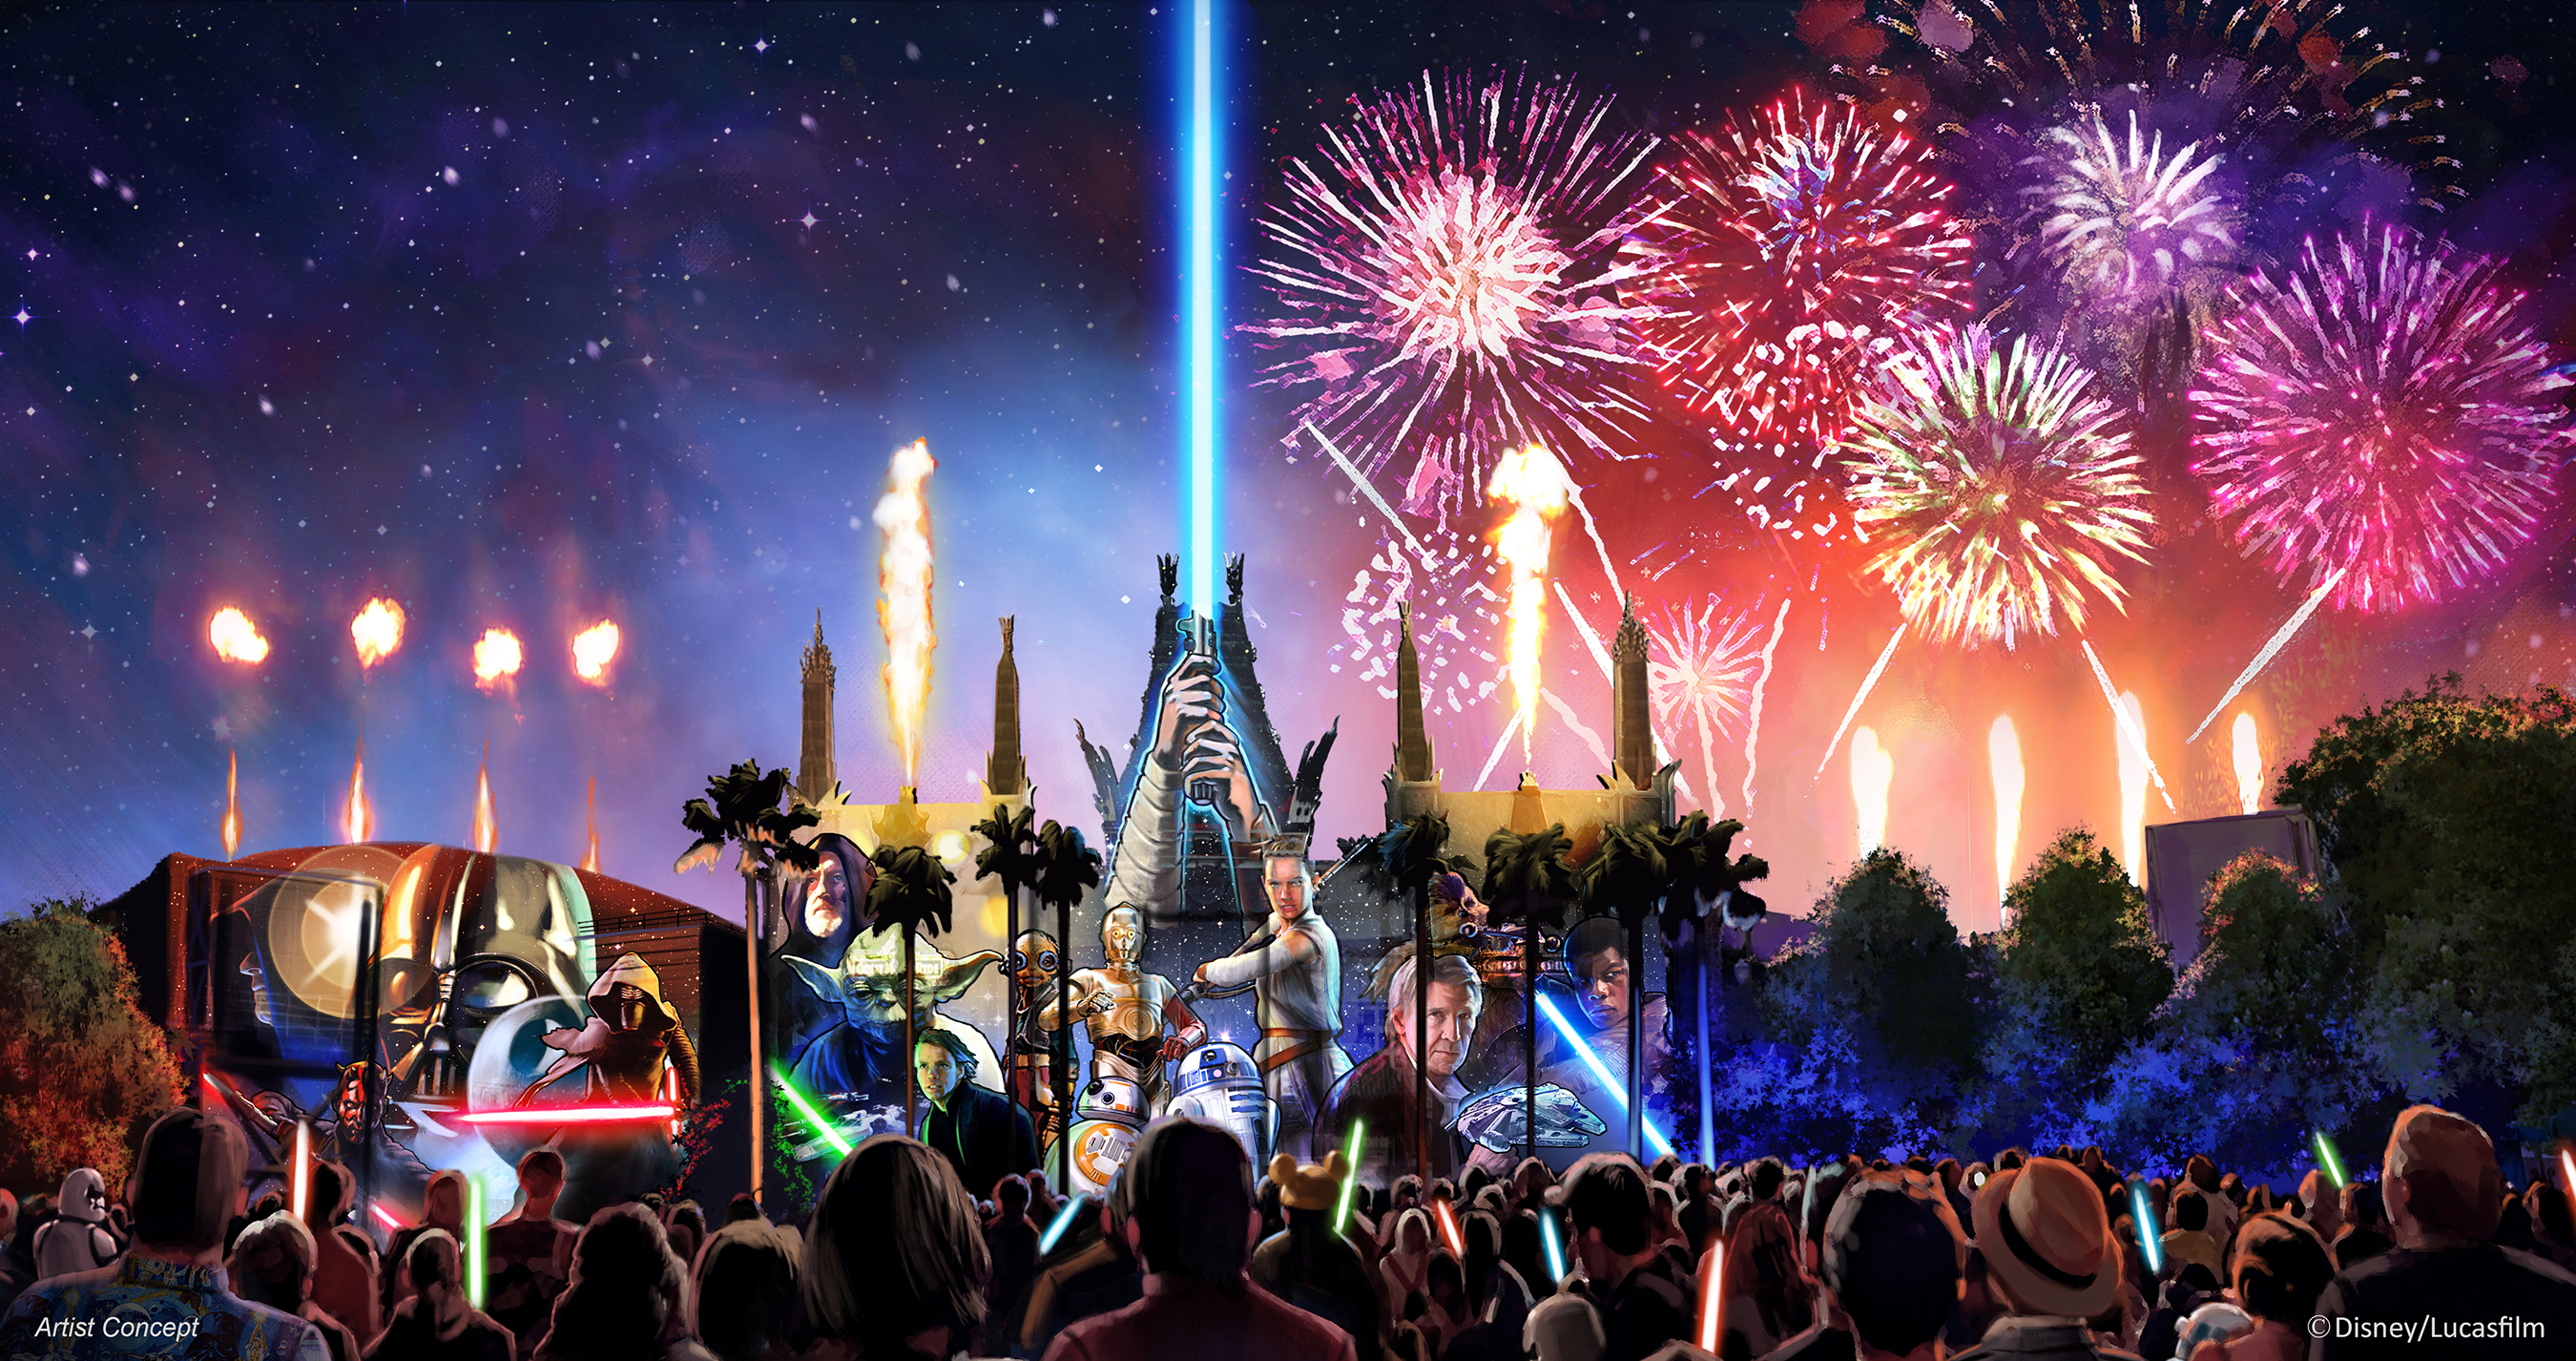 Starting in summer 2016, a new Star Wars fireworks show, "Star Wars: A Galactic Spectacular," will debut to guests at Disney's Hollywood Studios. The nightly show will combine fireworks, pyrotechnics, special effects and video projections that will turn the nearby Chinese Theater and other buildings into the twin suns of Tatooine, a field of battle droids, the trench of the Death Star, Starkiller Base and other Star Wars destinations. The show also will feature a tower of fire and spotlight beams, creating massive lightsabers in the sky. (Disney/Lucasfilm)